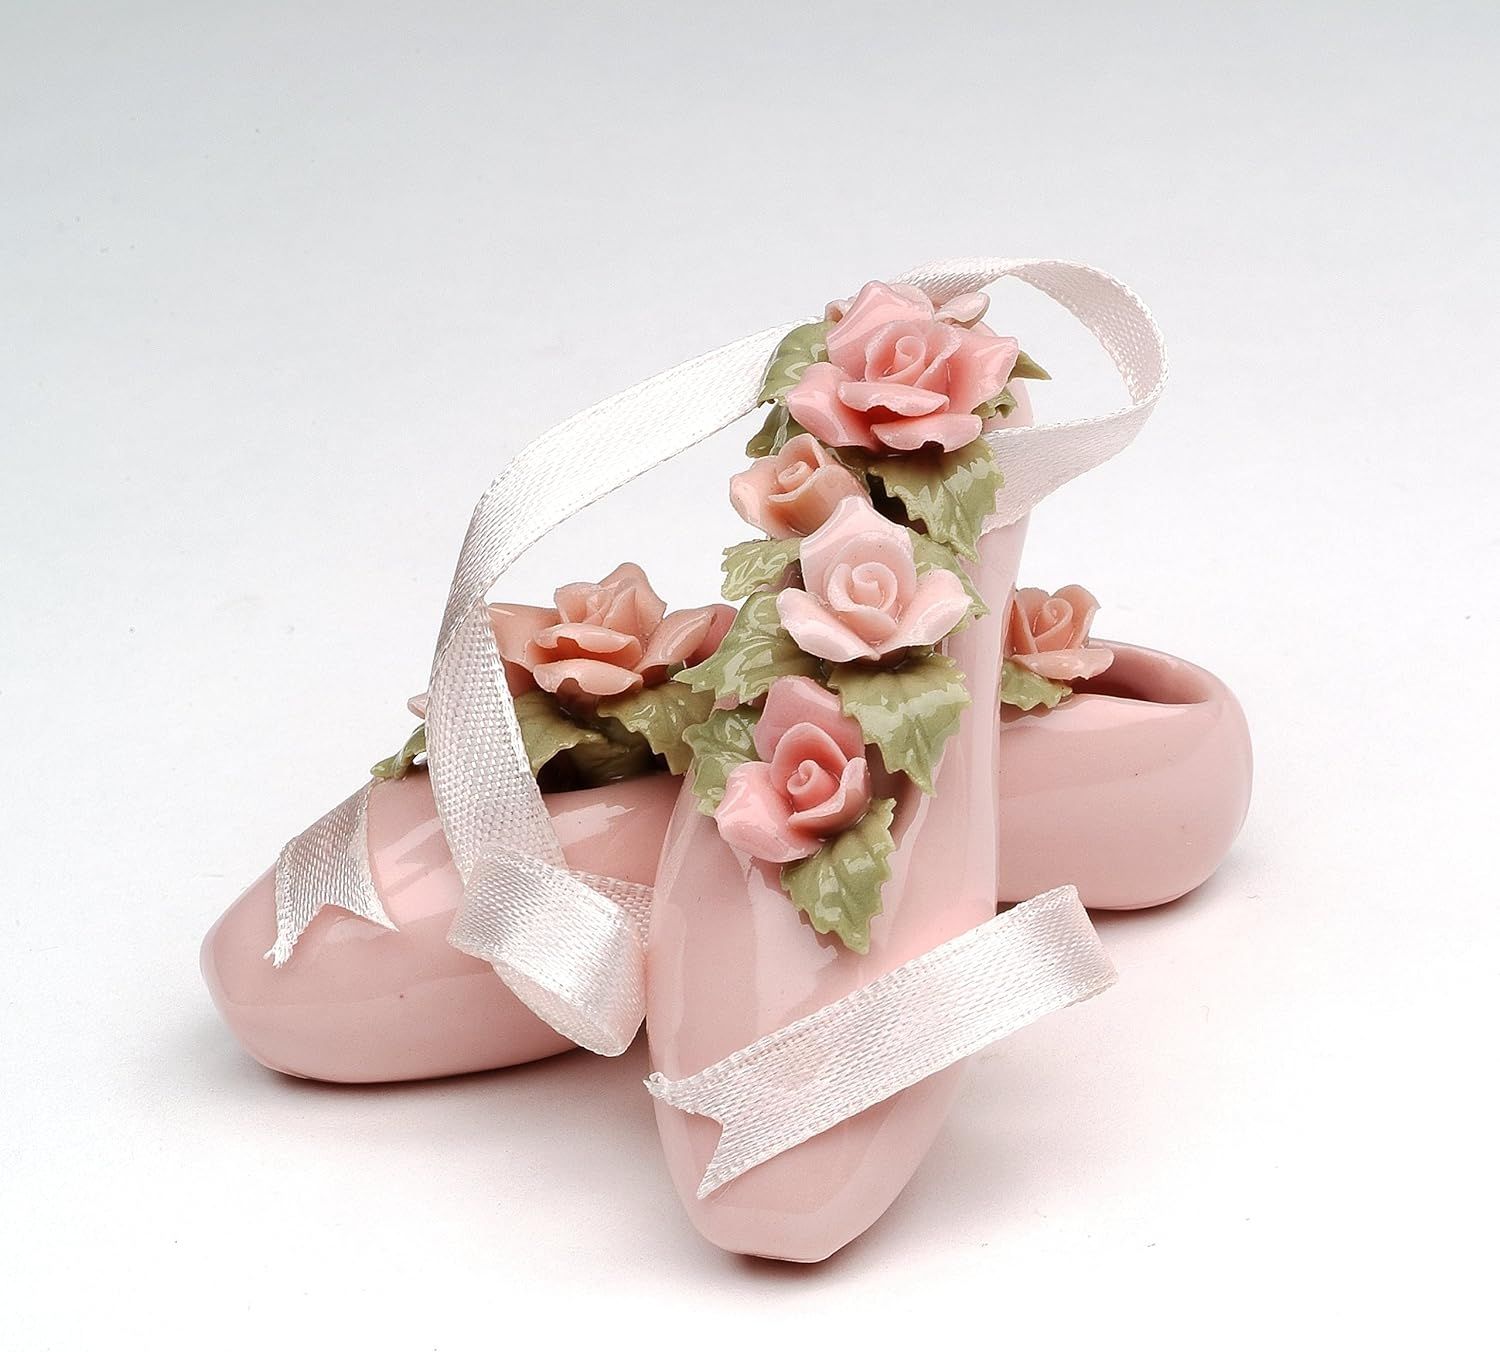 Cosmos Gifts 96455 Fine Porcelain Mini Ballet Slippers Figurine, 2-3/4" L | Amazon (US)